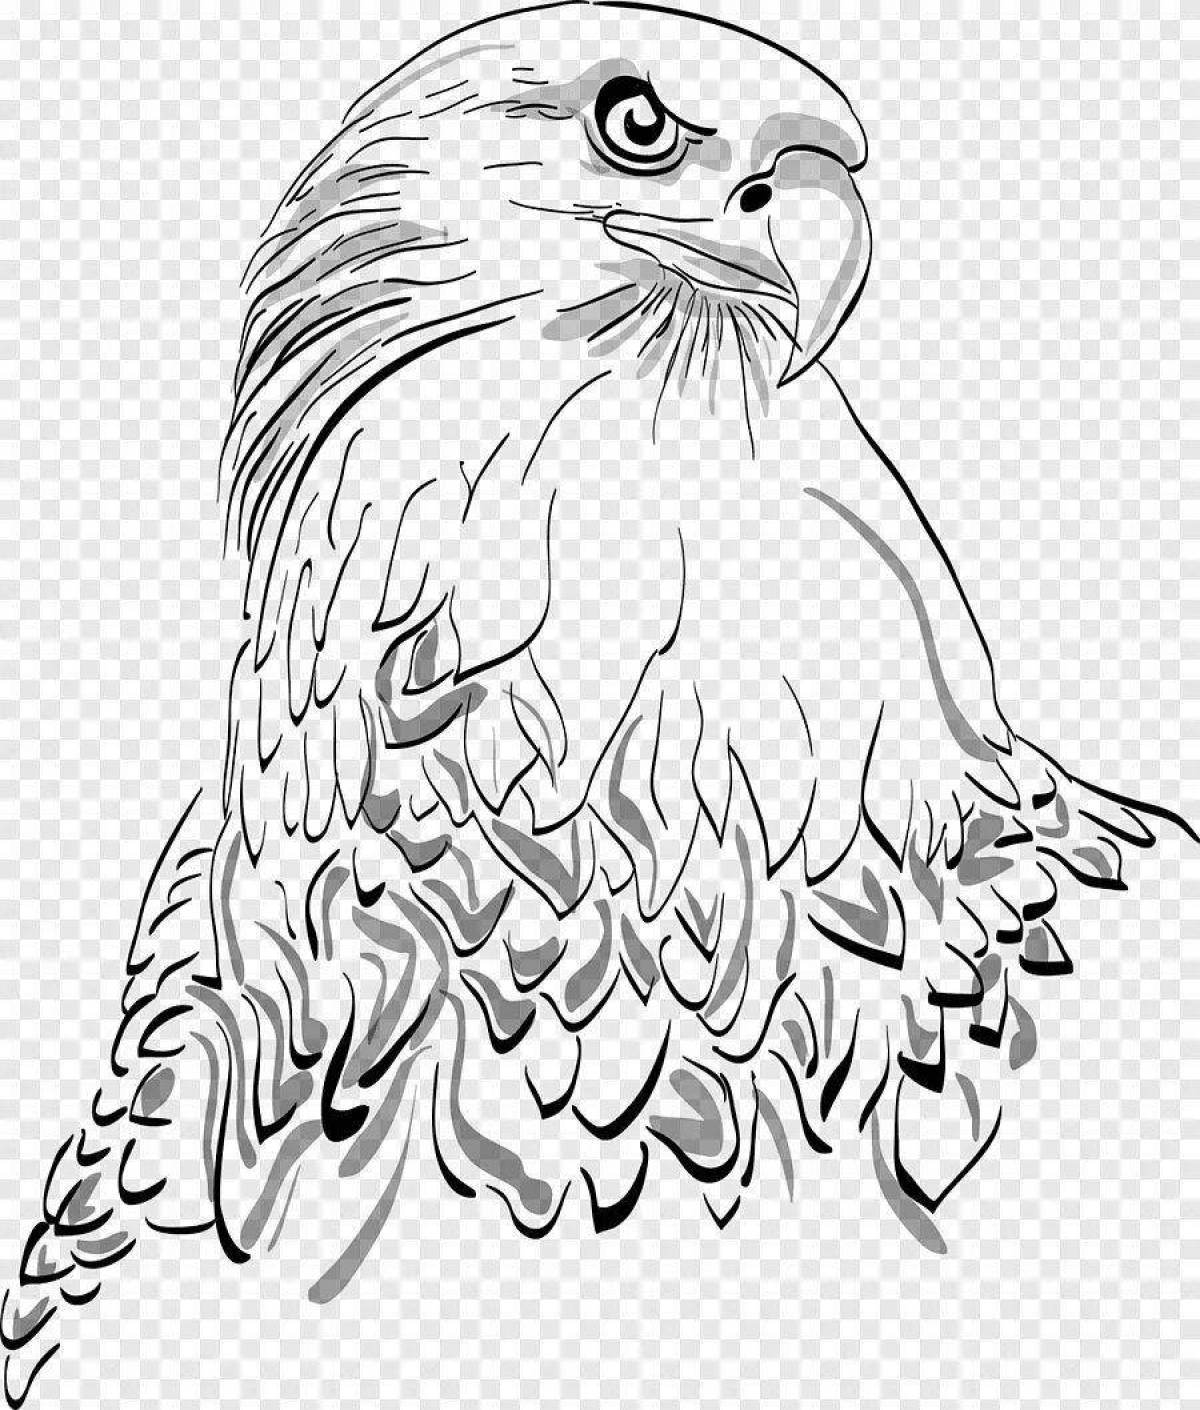 Impressive white-tailed eagle coloring page